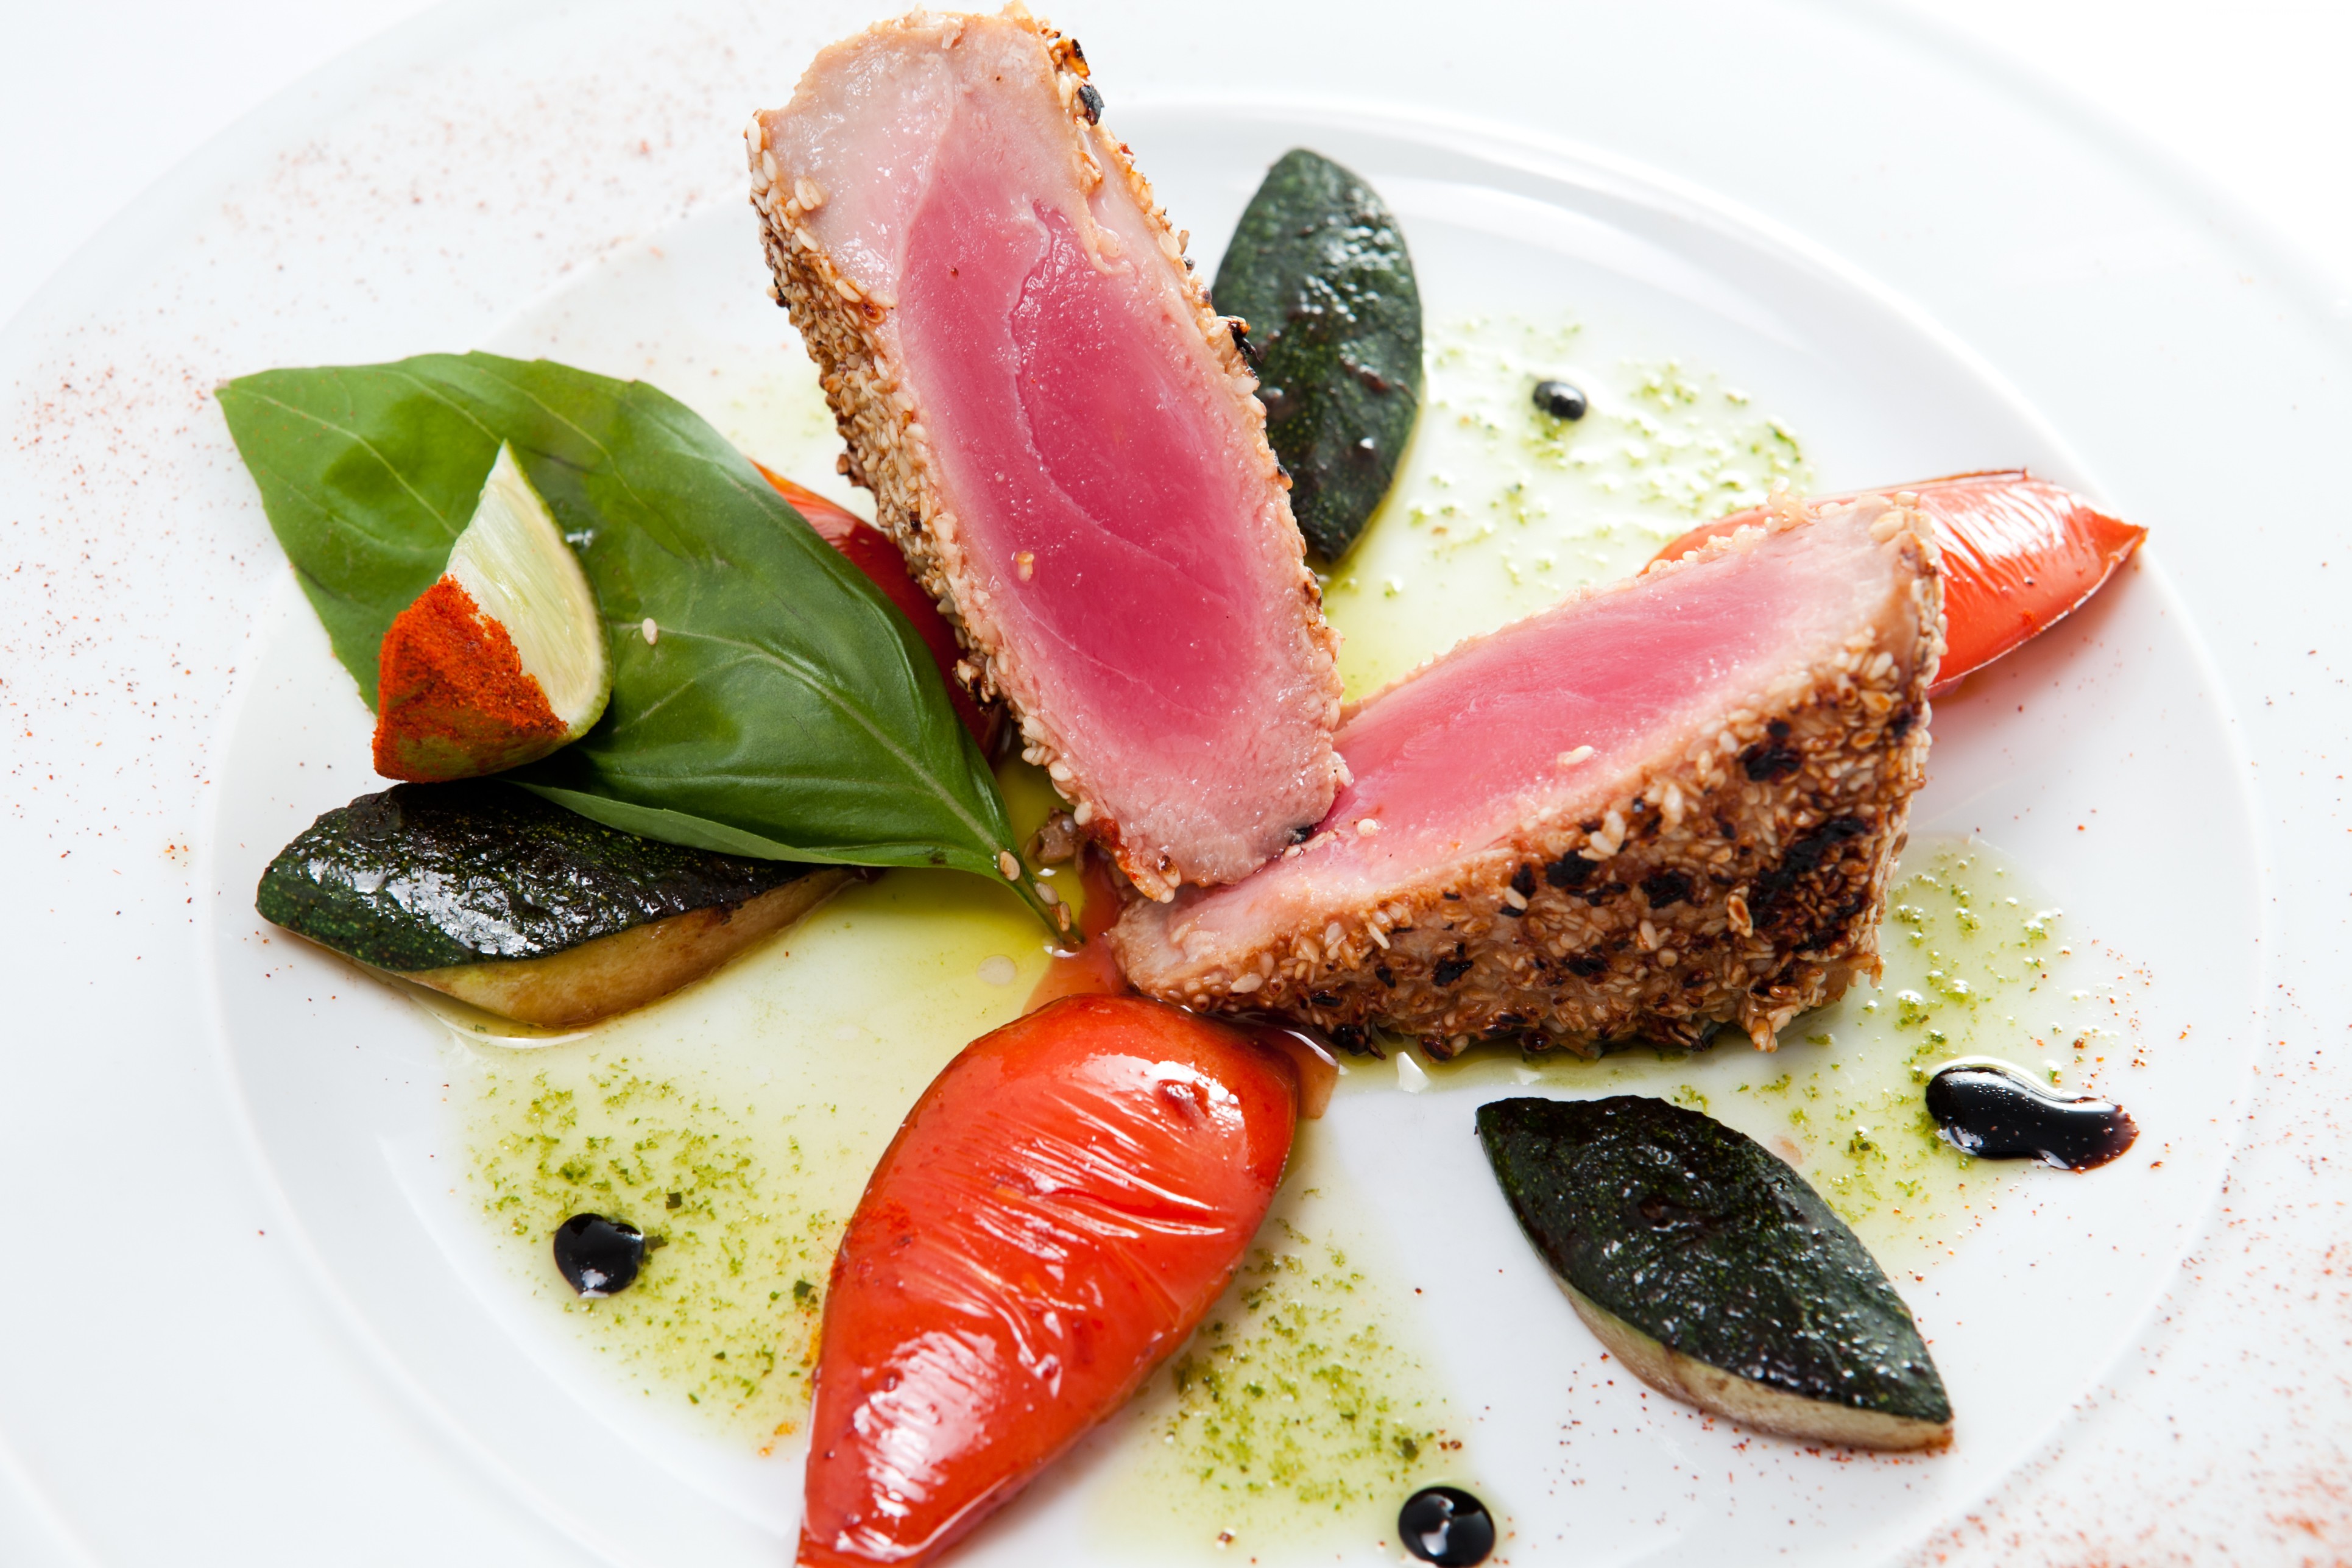 Appetizing Tuna Steak With Vegetables On A White Plate